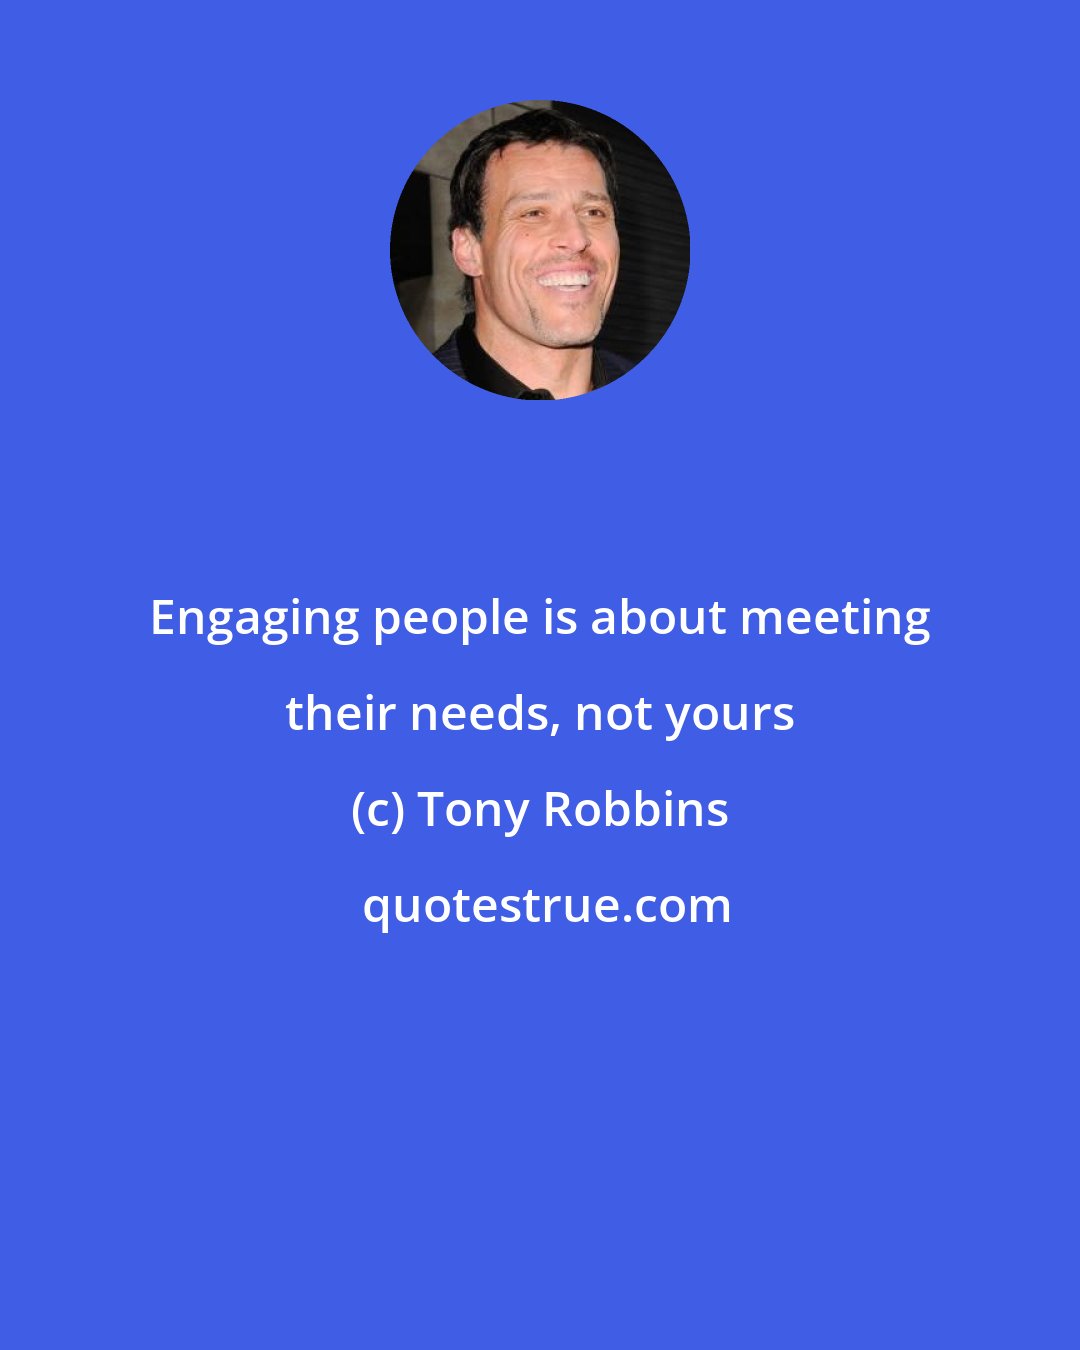 Tony Robbins: Engaging people is about meeting their needs, not yours